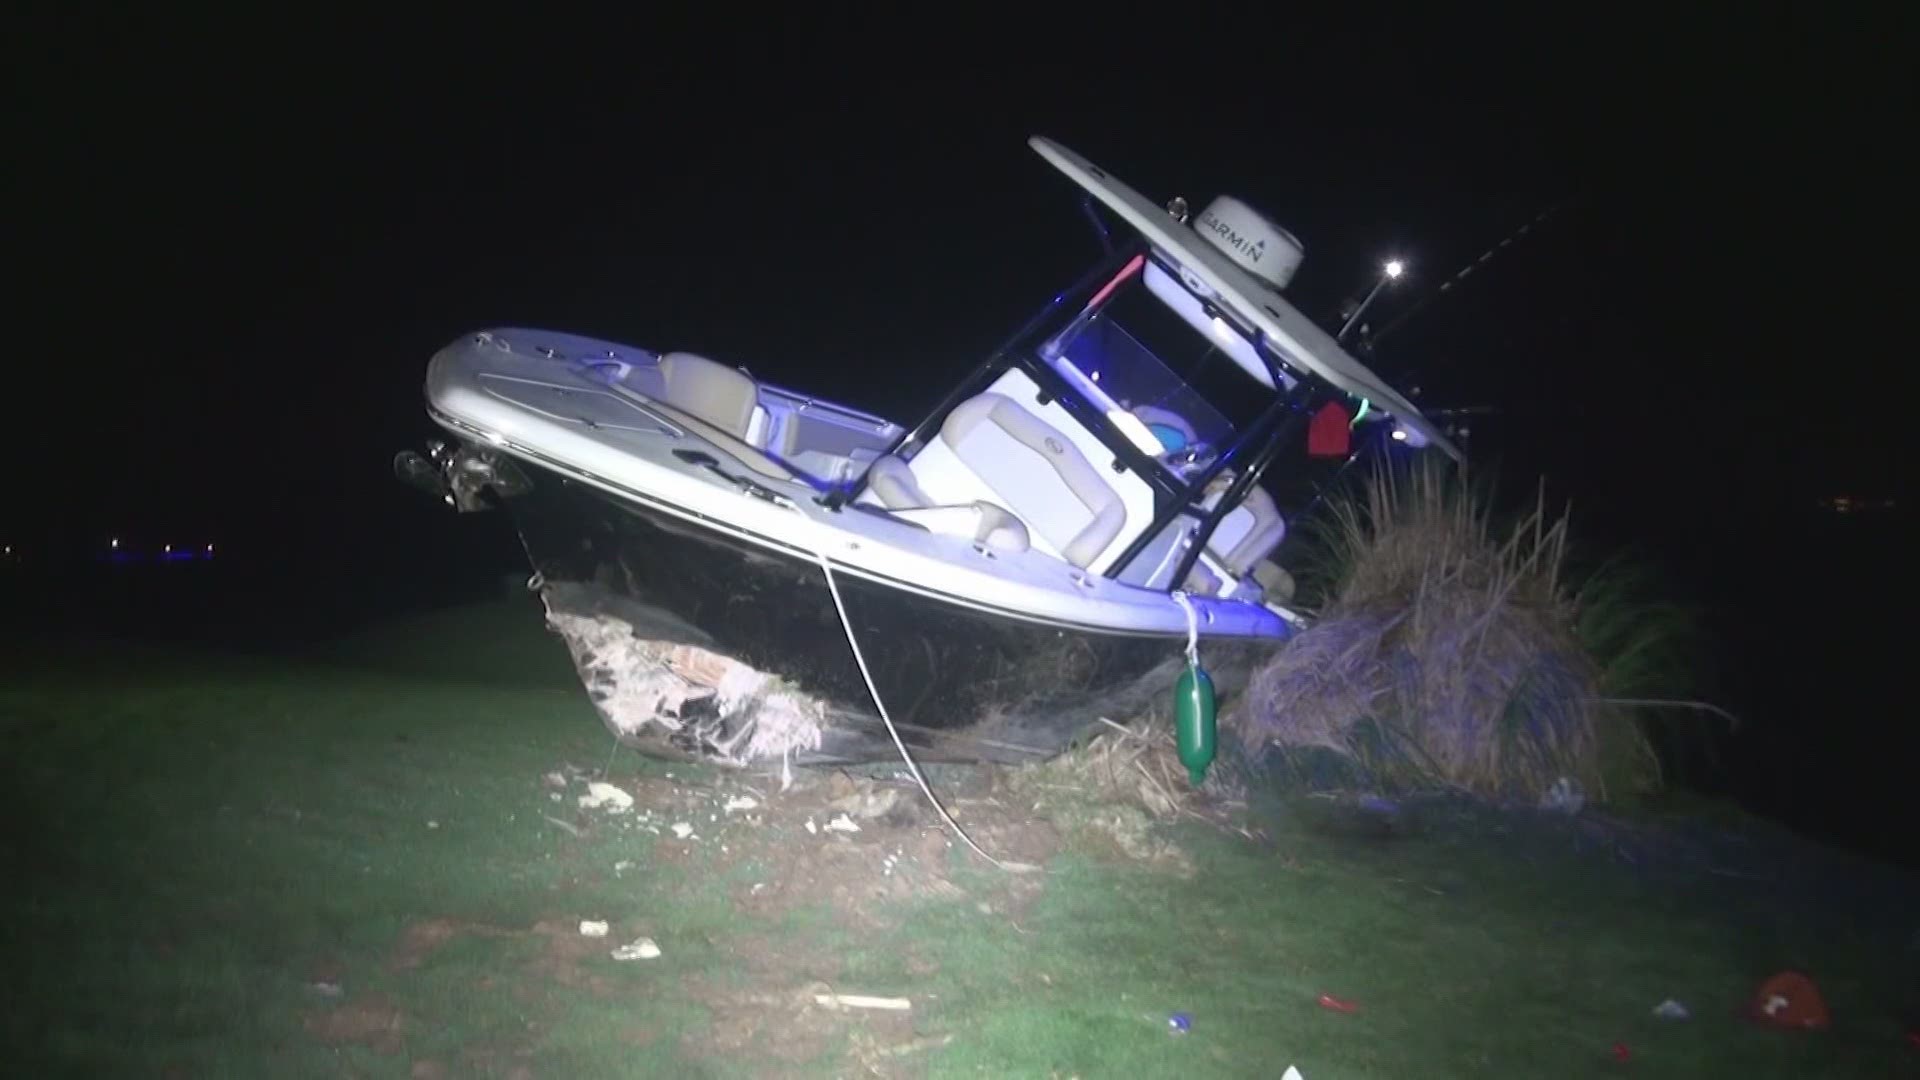 Lake Conroe boat crash 1 person found dead, 3 severly injured